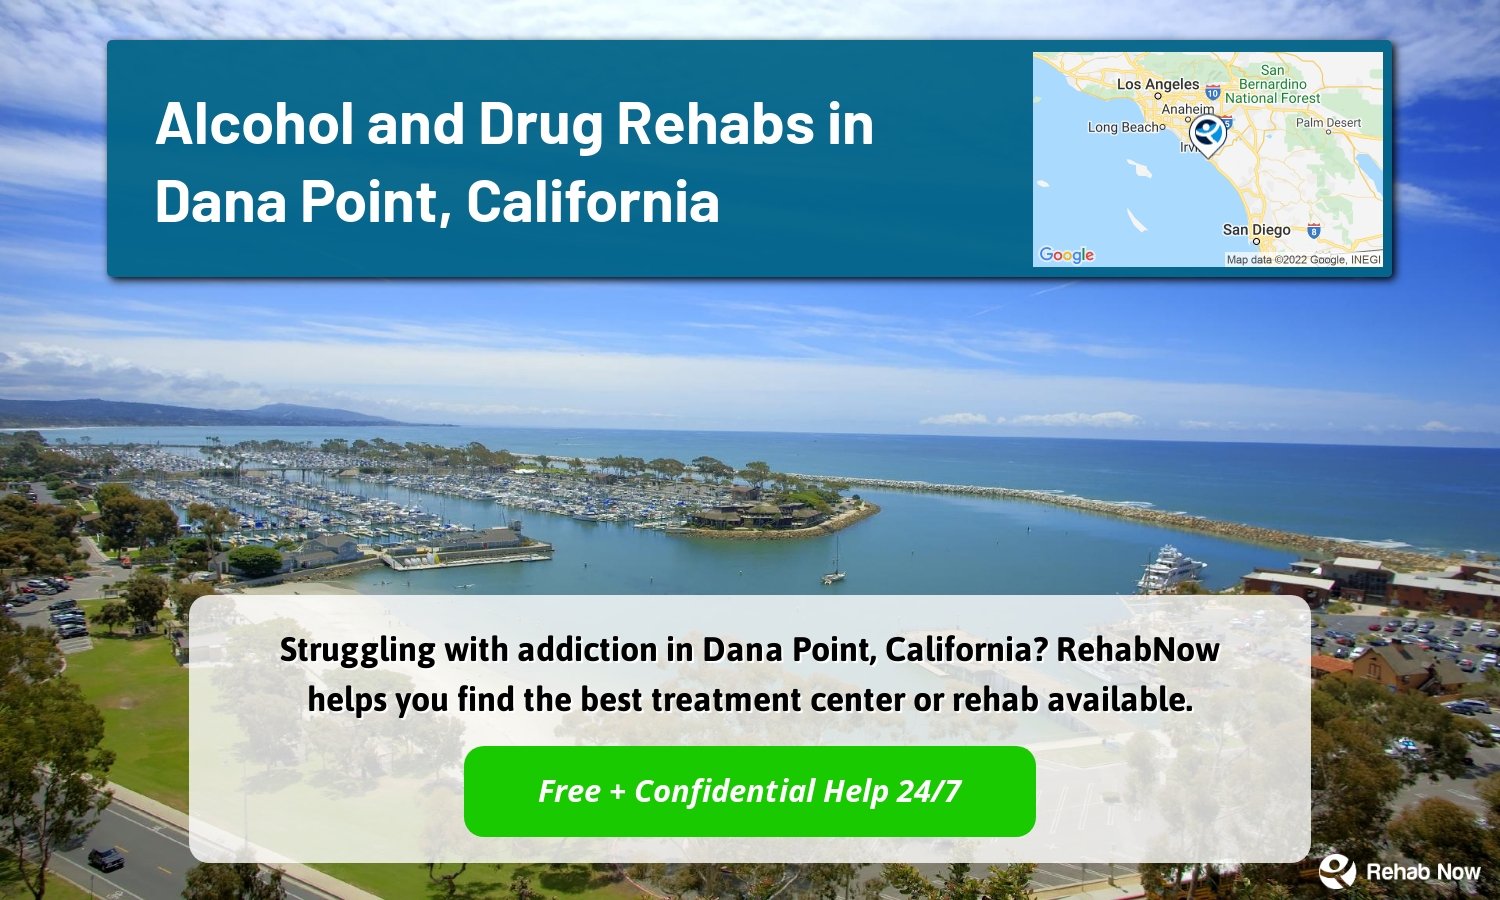 Struggling with addiction in Dana Point, California? RehabNow helps you find the best treatment center or rehab available.